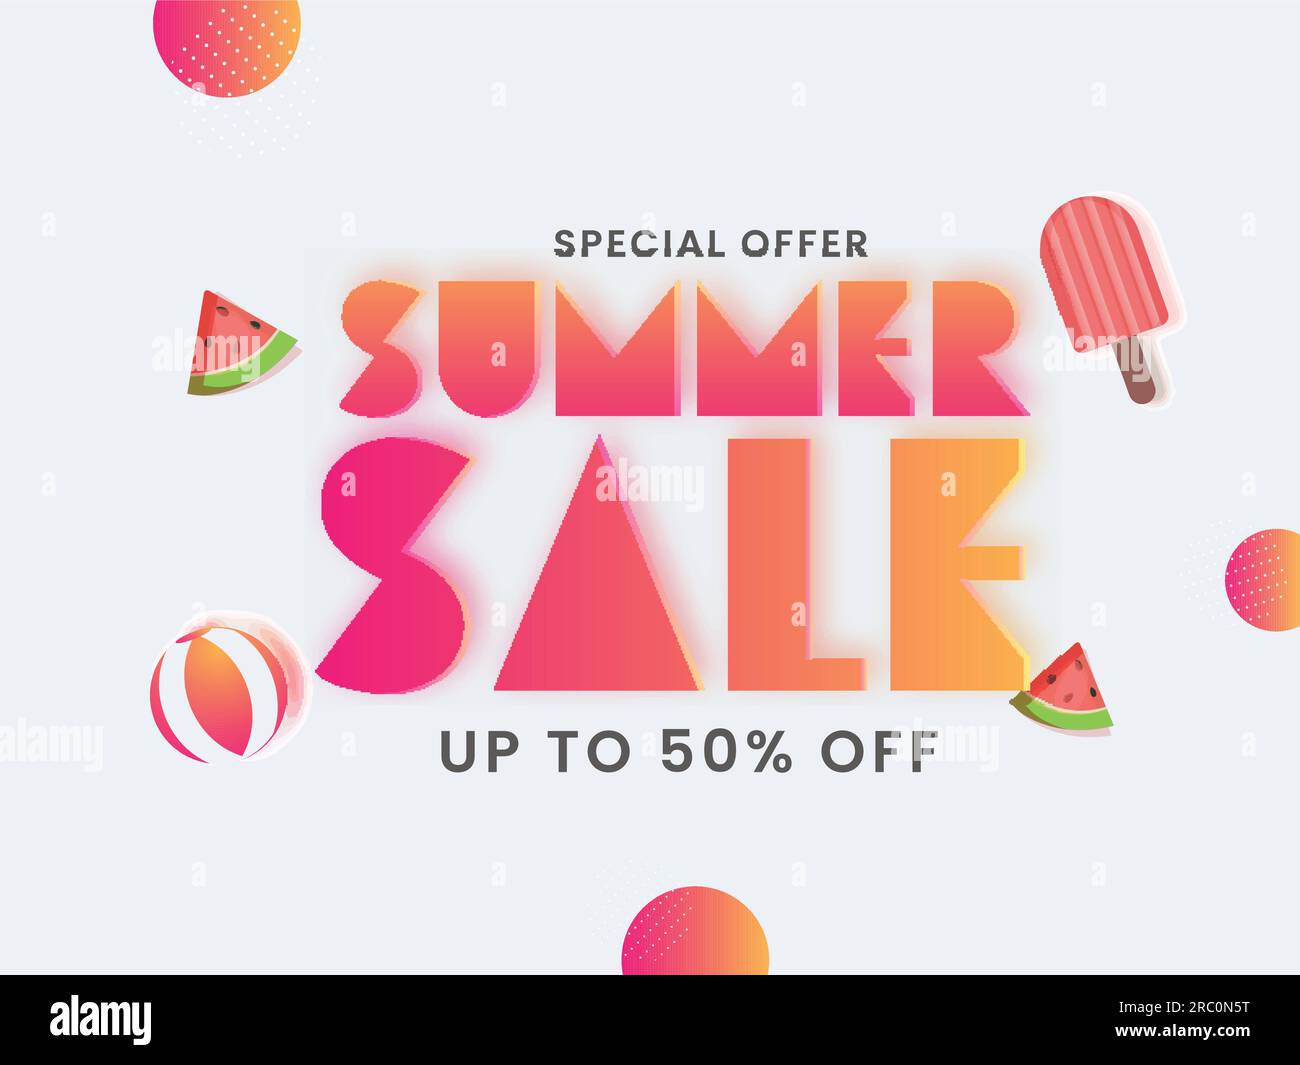 UP TO 50% Off For Summer Sale Poster Design Decorated With Watermelon Slice, Beach Ball And Ice Cream. Stock Vector